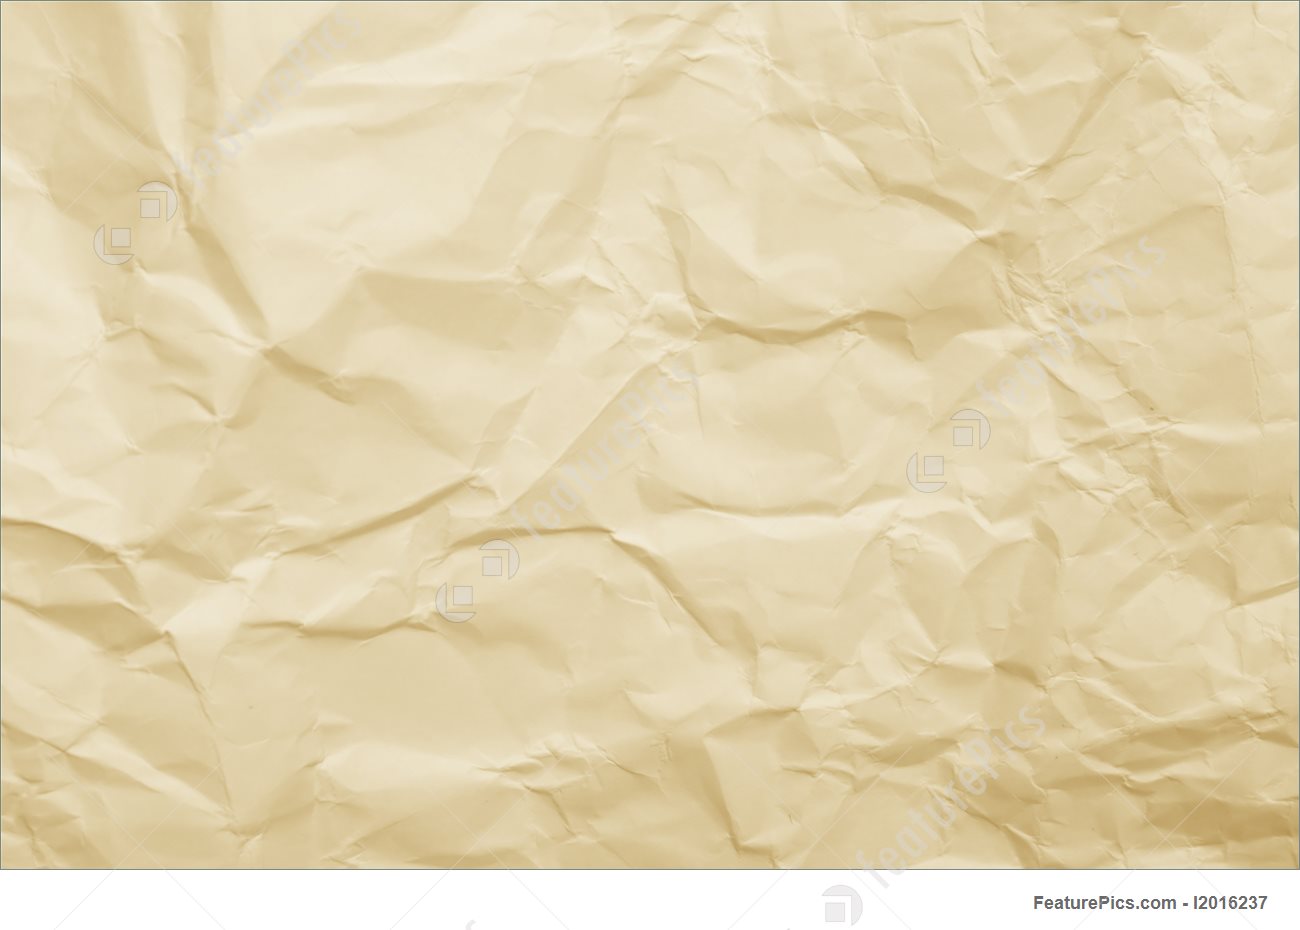 Texture Wrinkled Paper Background Stock Picture I2016237 At